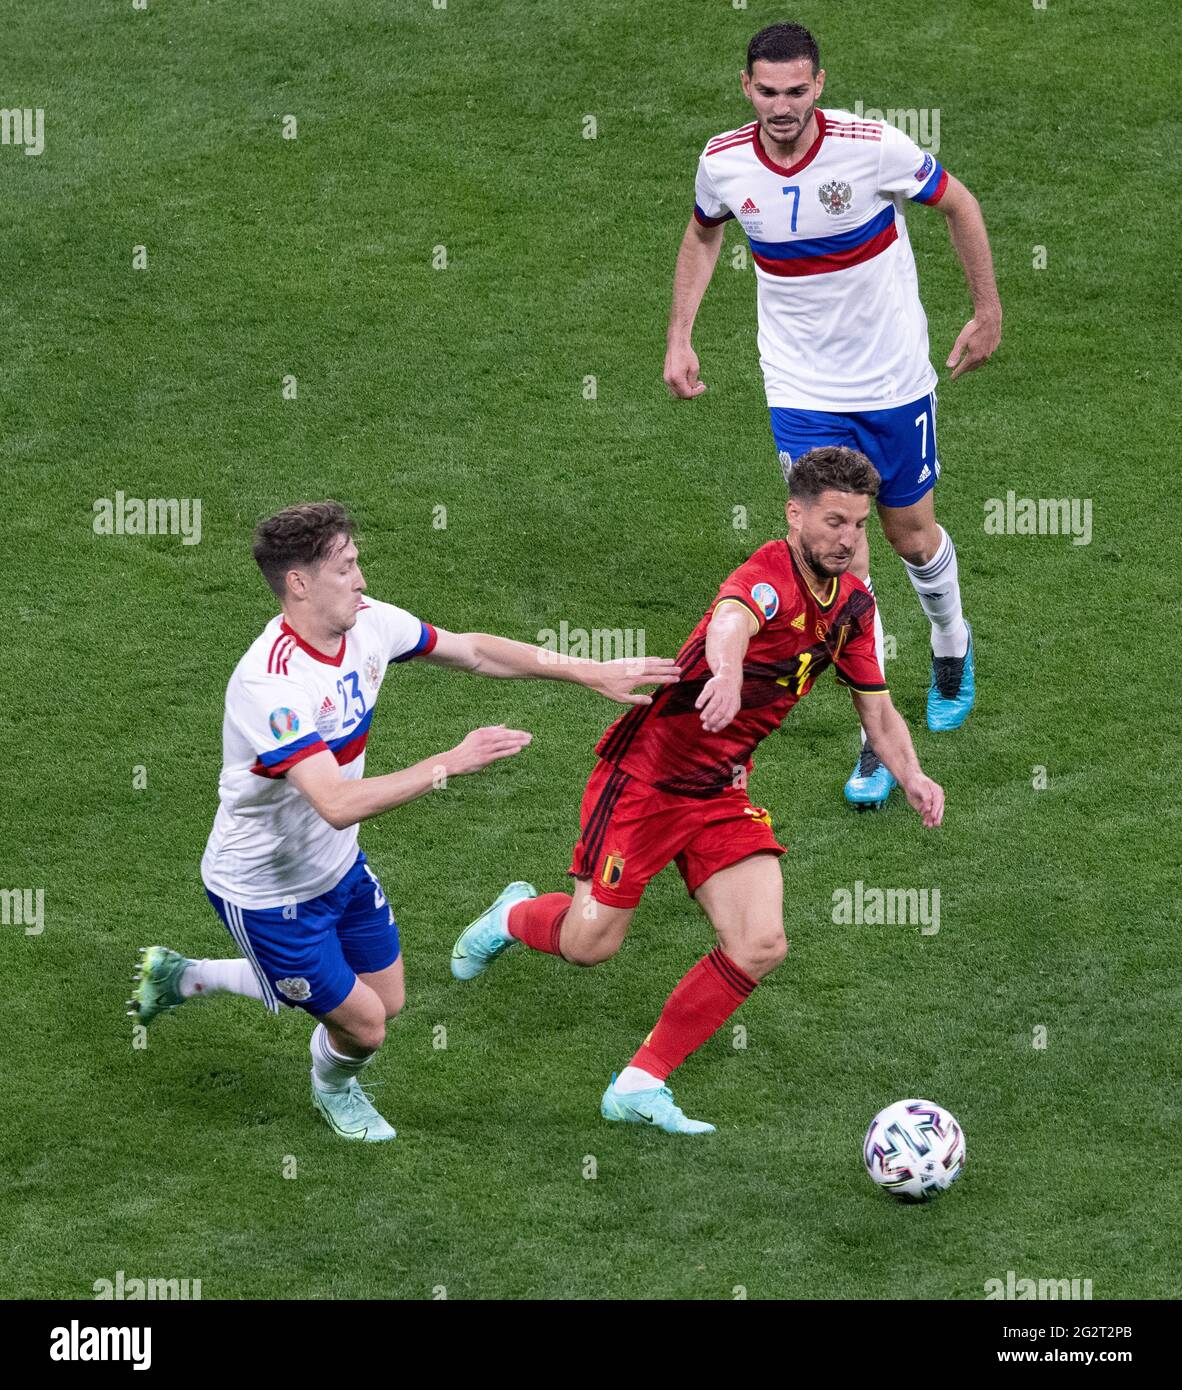 SAINT PETERSBURG, RUSSIA - JUNE 12: Dries Marten of Belgium is chased down by Daler Kuzyayev [left] and Magomed Ozdoyev of Russia during the UEFA Euro 2020 Championship Group B match between Belgium and Russia on June 12, 2021 in Saint Petersburg, Russia. (Photo by MB Media) Stock Photo